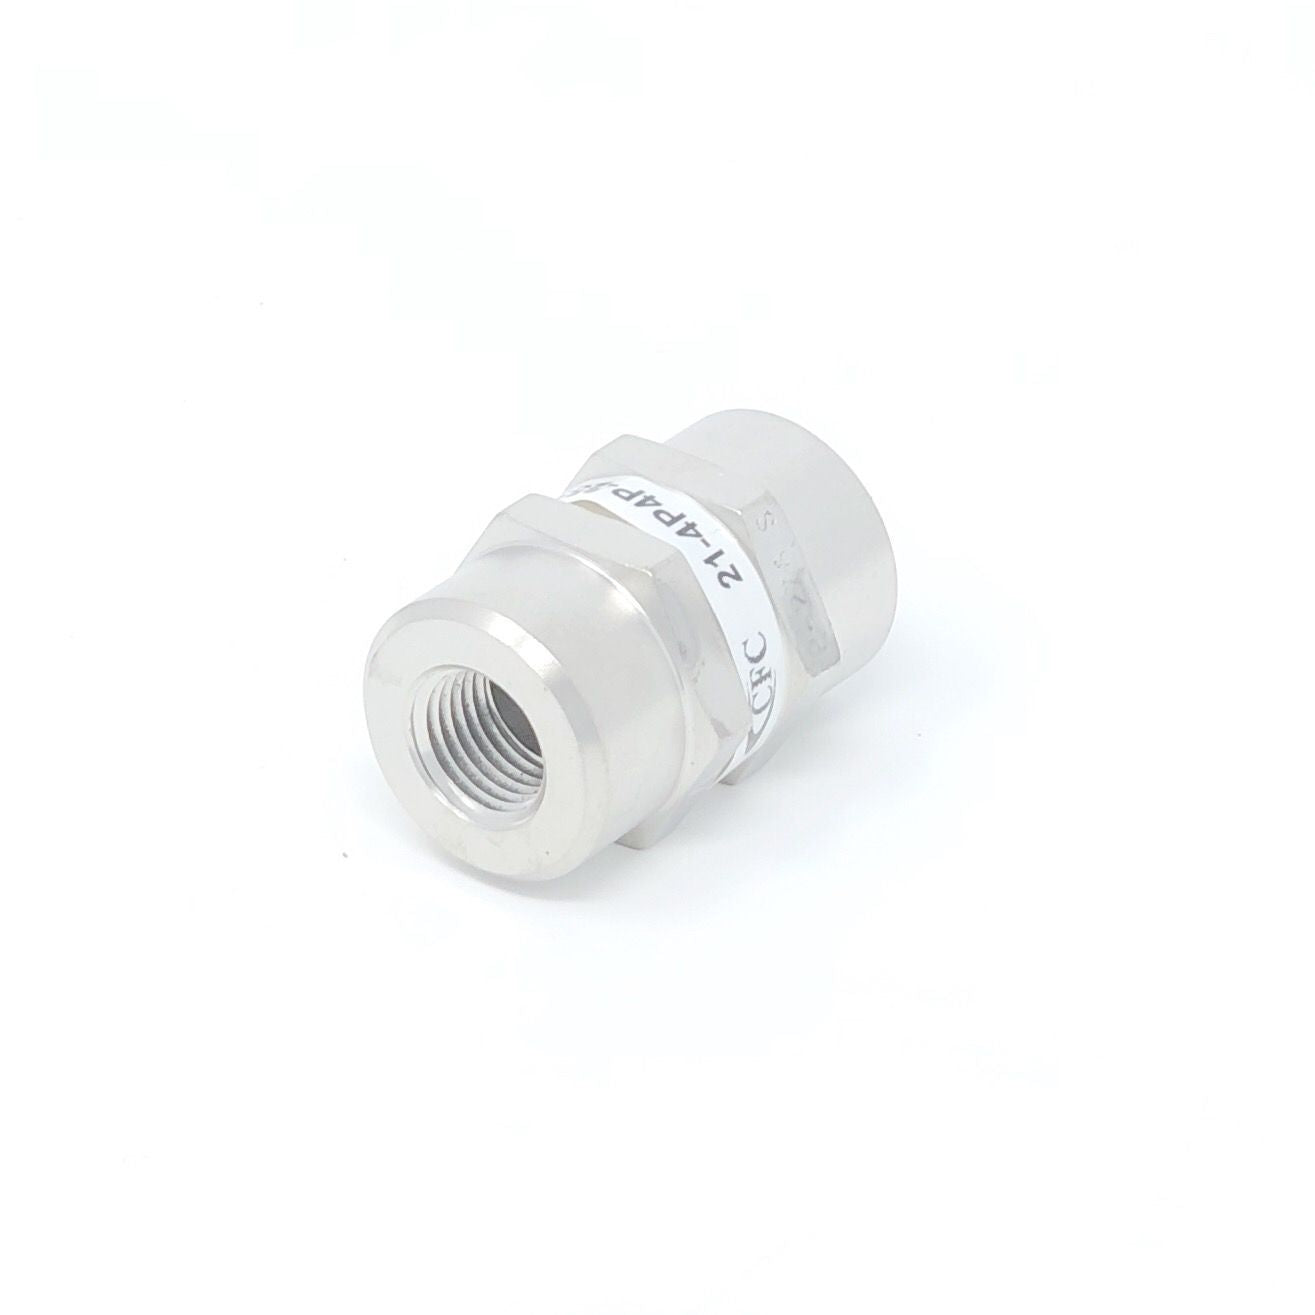 21-12T12T-25S : Chase High Pressure Inline Filter, 3000psi, 3/4" 37 Degree Flare , 25 Micron, No Visual Indicator, With Bypass